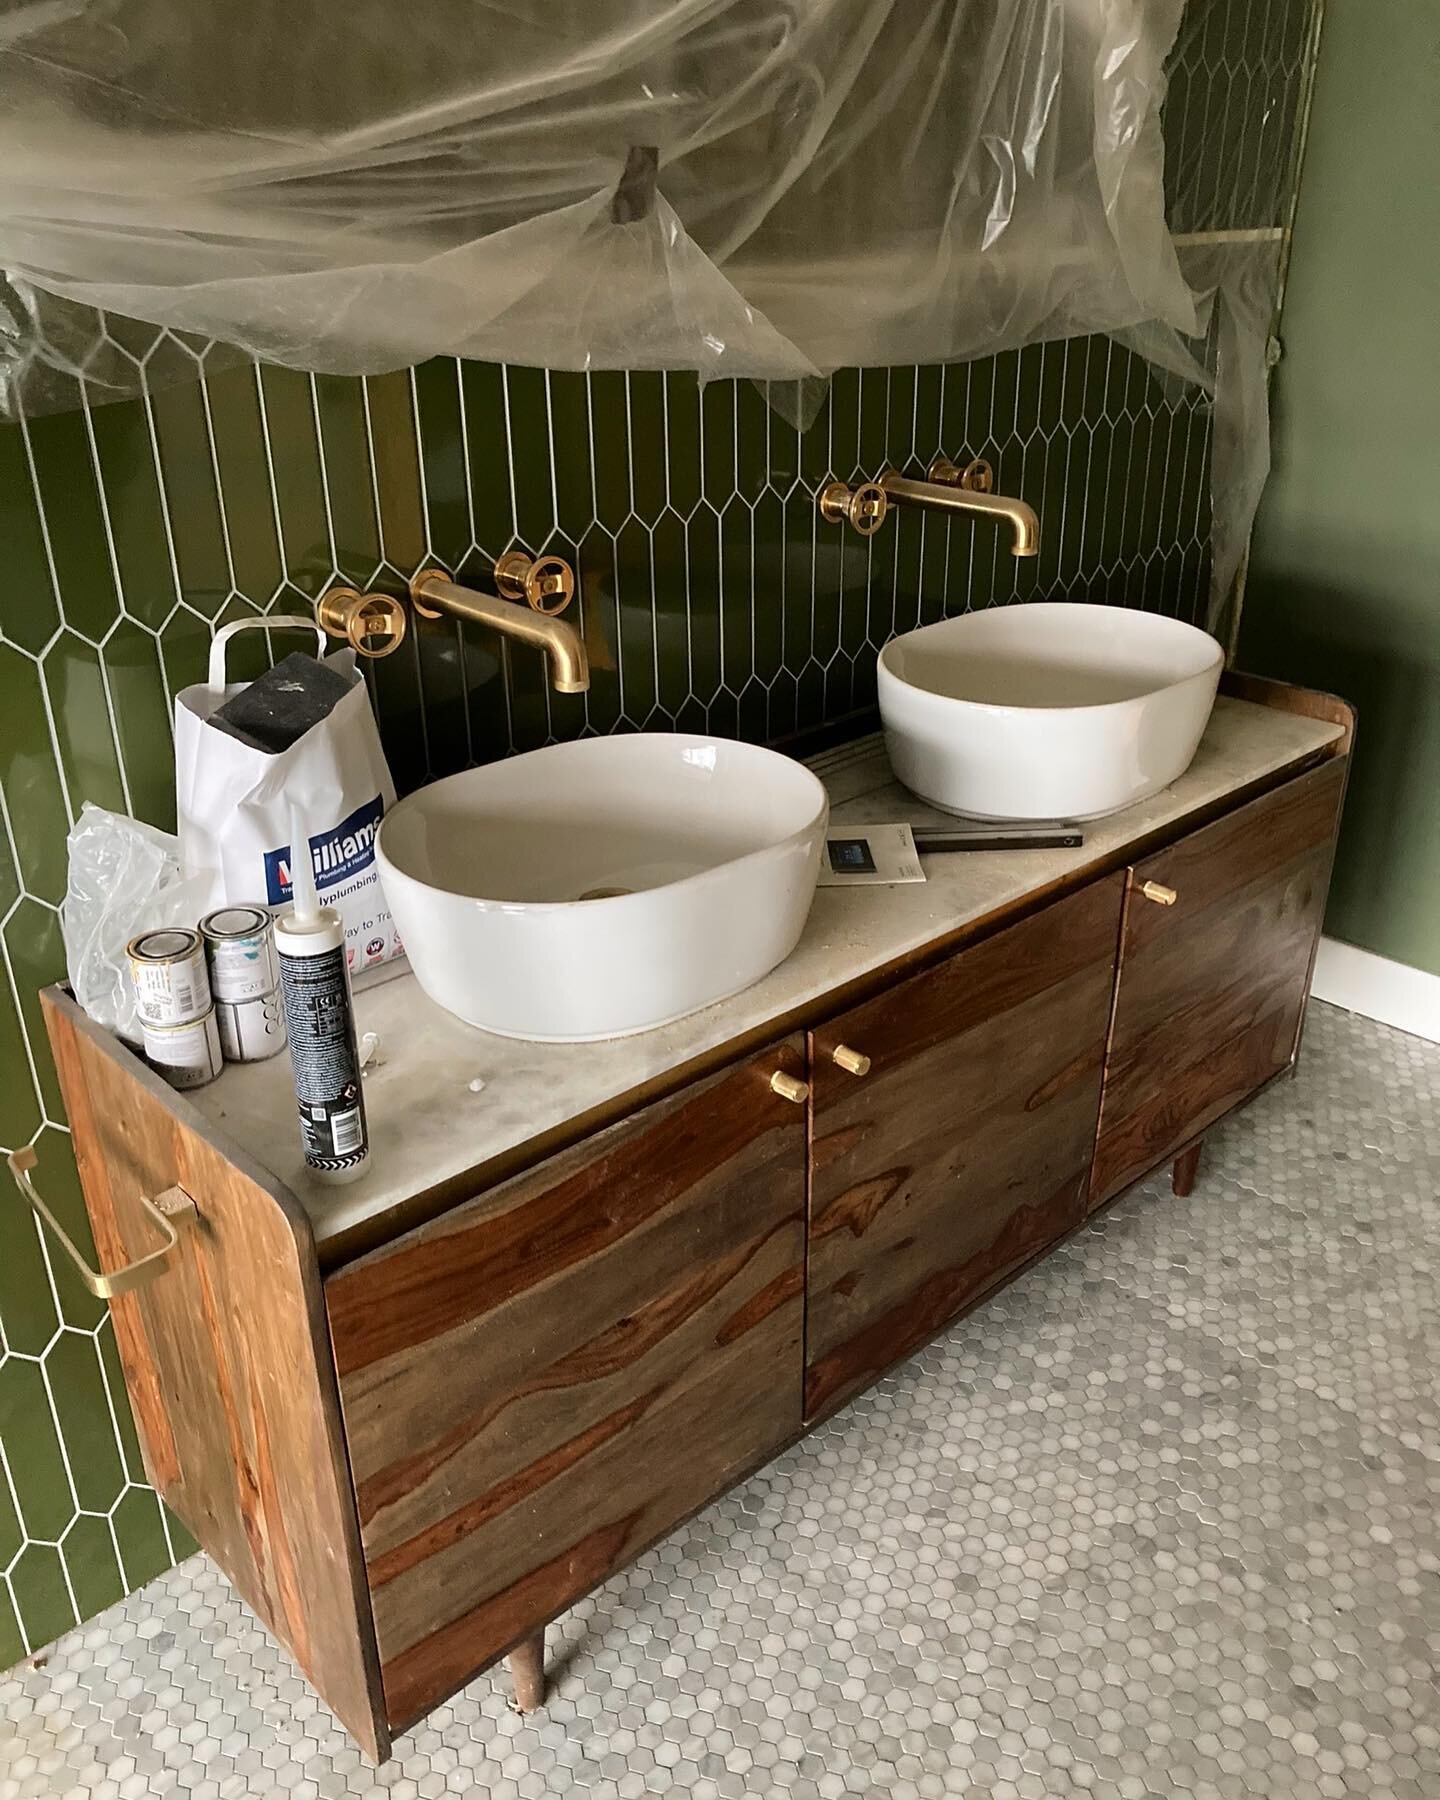 A mixture of unique tiles going into these beautiful bathrooms at the moment. These finishing touches are underway and we&rsquo;re so excited to start seeing these rooms take shape. 

More updates coming very soon!

#bathroomrenovation #bathroomdesig